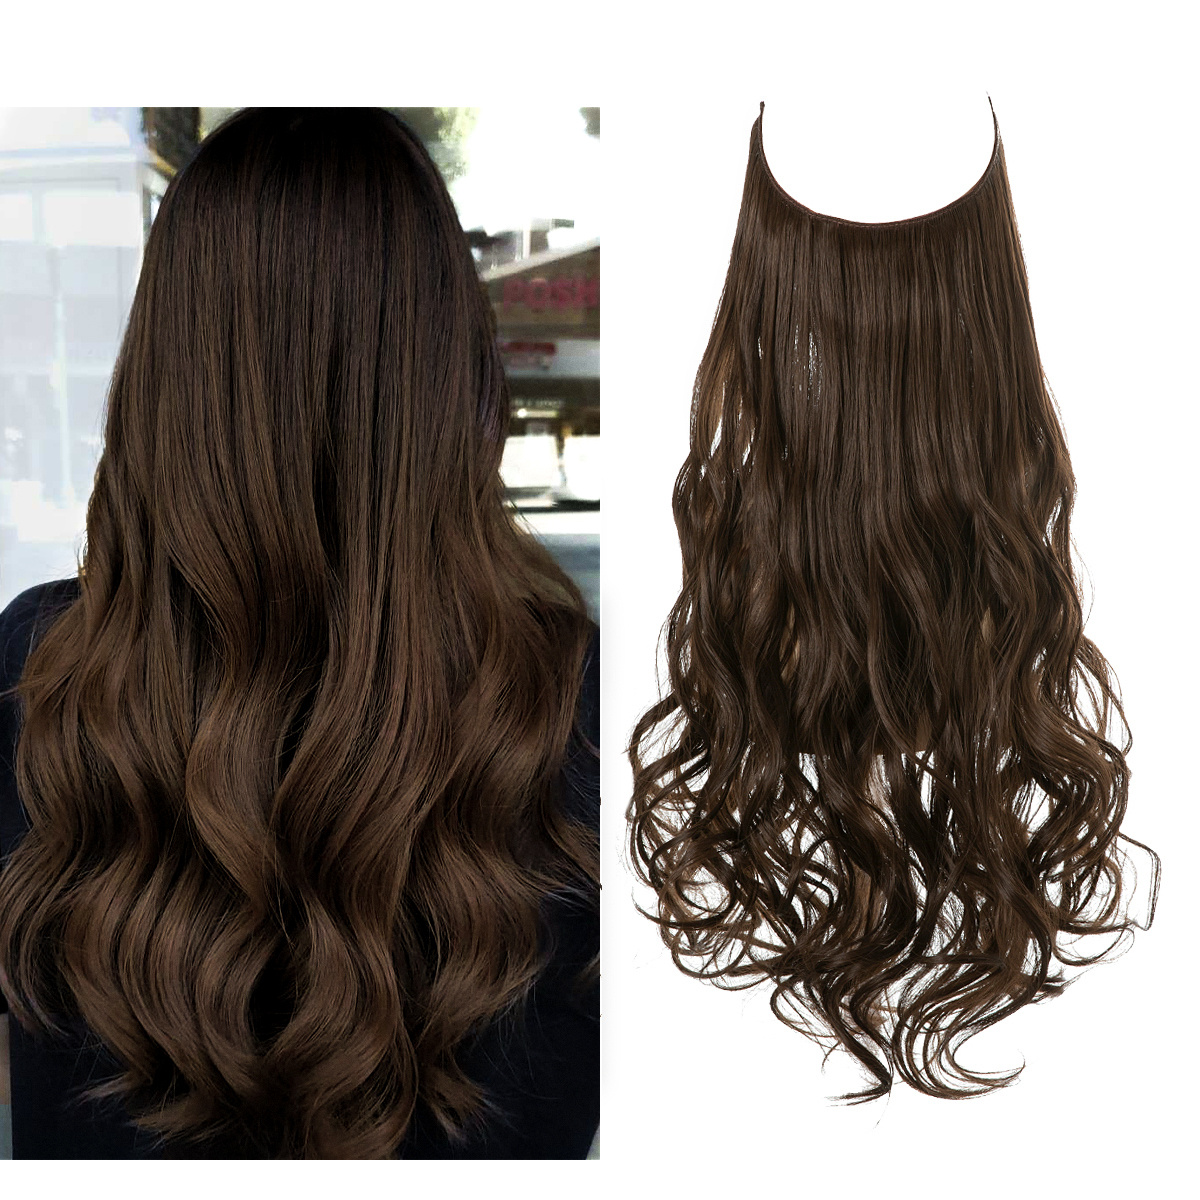 Clip in Halo Hair Extensions: Invisible Wire Hair Extension with Adjustable  Size Transparent Headband 4 Secure Clips 20 Inch Long Curly Wavy Light